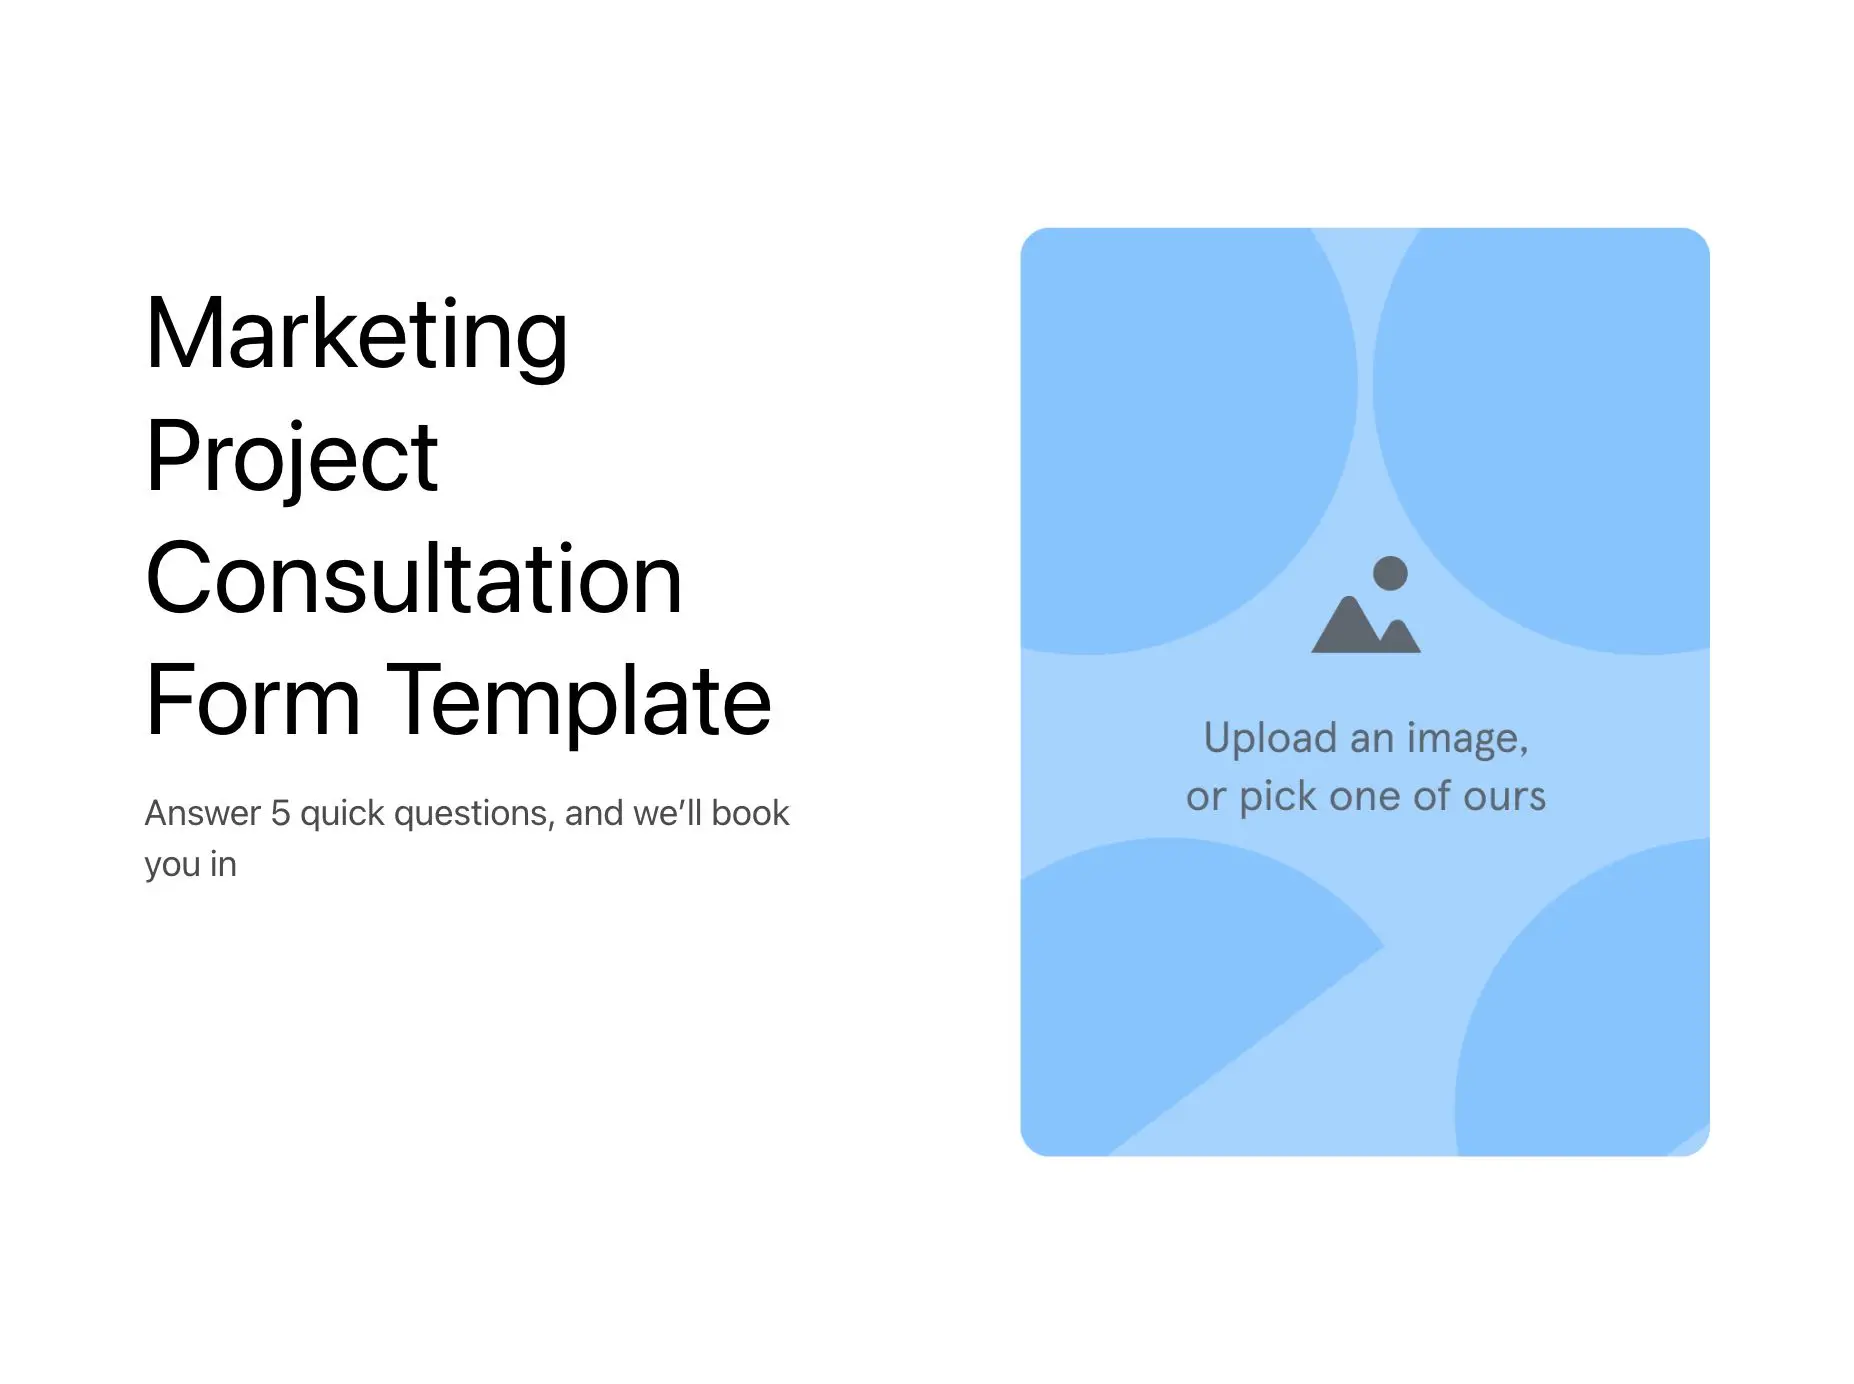 Marketing Project Consultation Form Template Hero